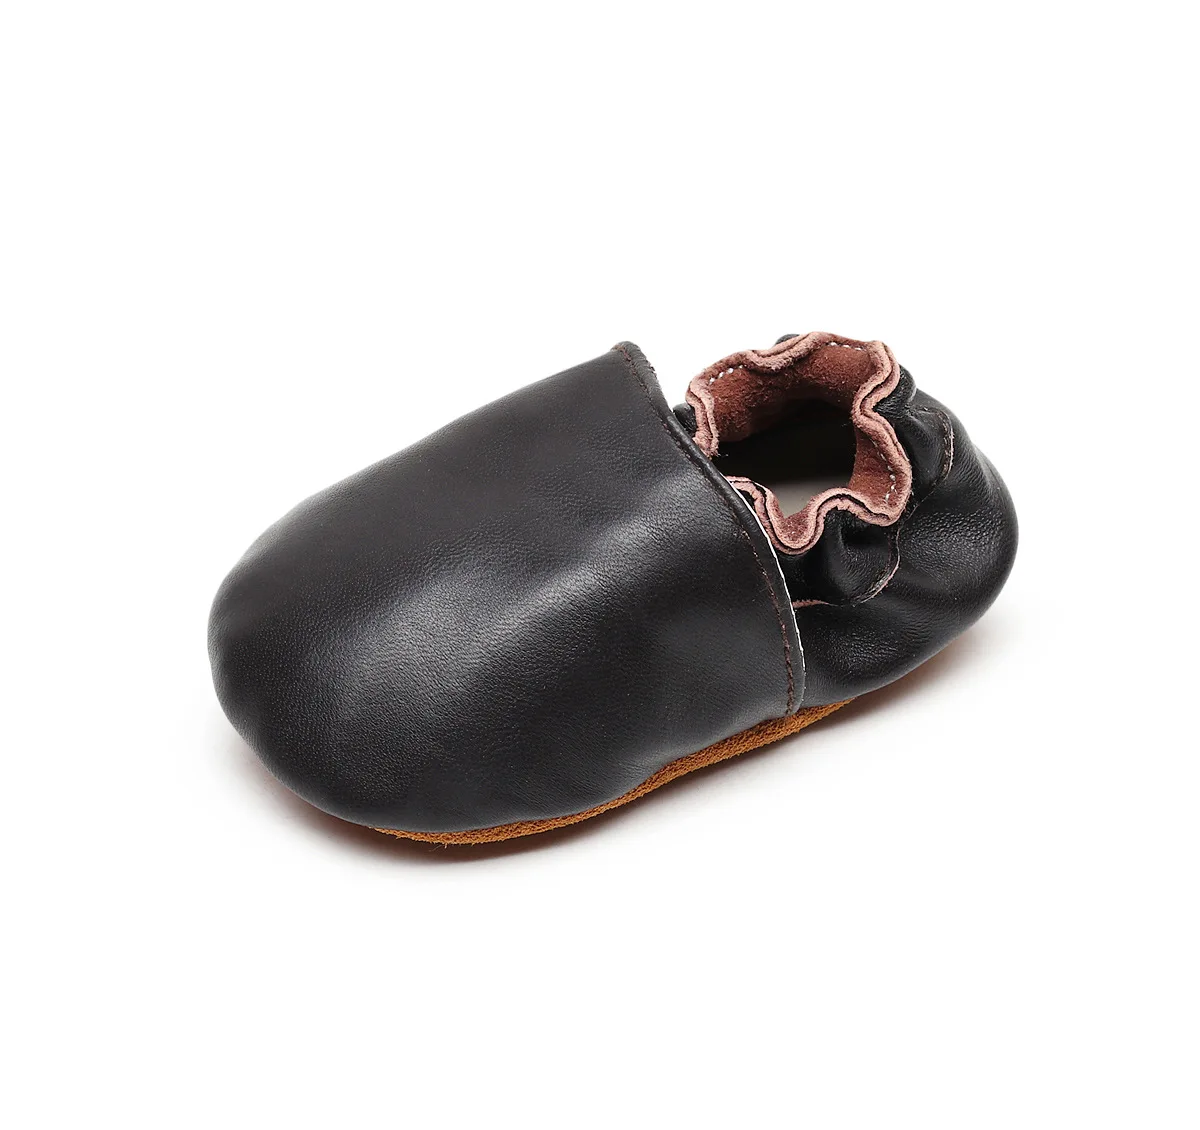 

New Genuine Leather Handmade Baby Moccasins Solid Color Baby Booties Soft Sole First Walkers Crib Shoes Slip on Infant Footwears